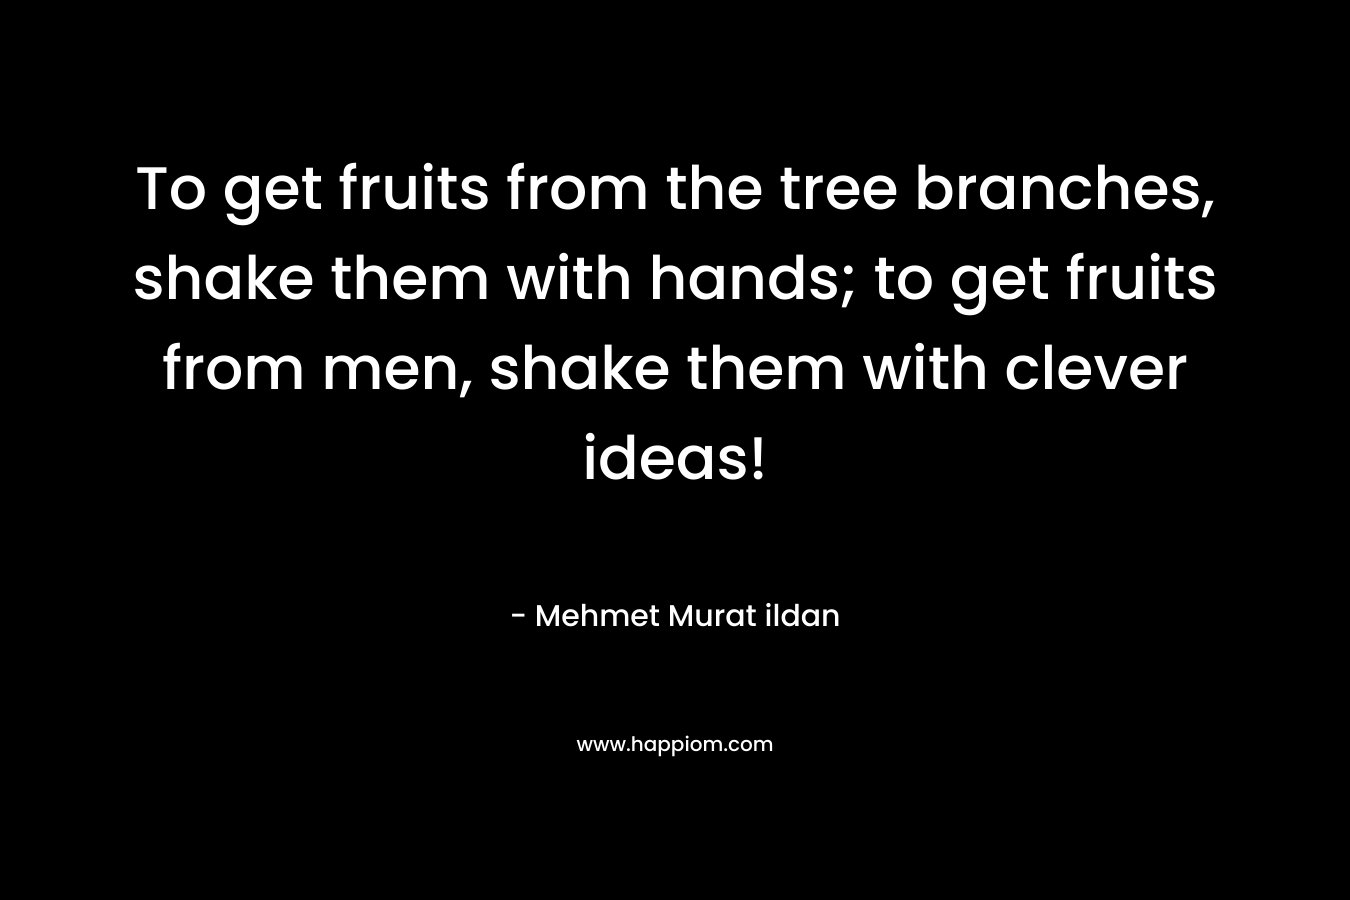 To get fruits from the tree branches, shake them with hands; to get fruits from men, shake them with clever ideas! – Mehmet Murat ildan